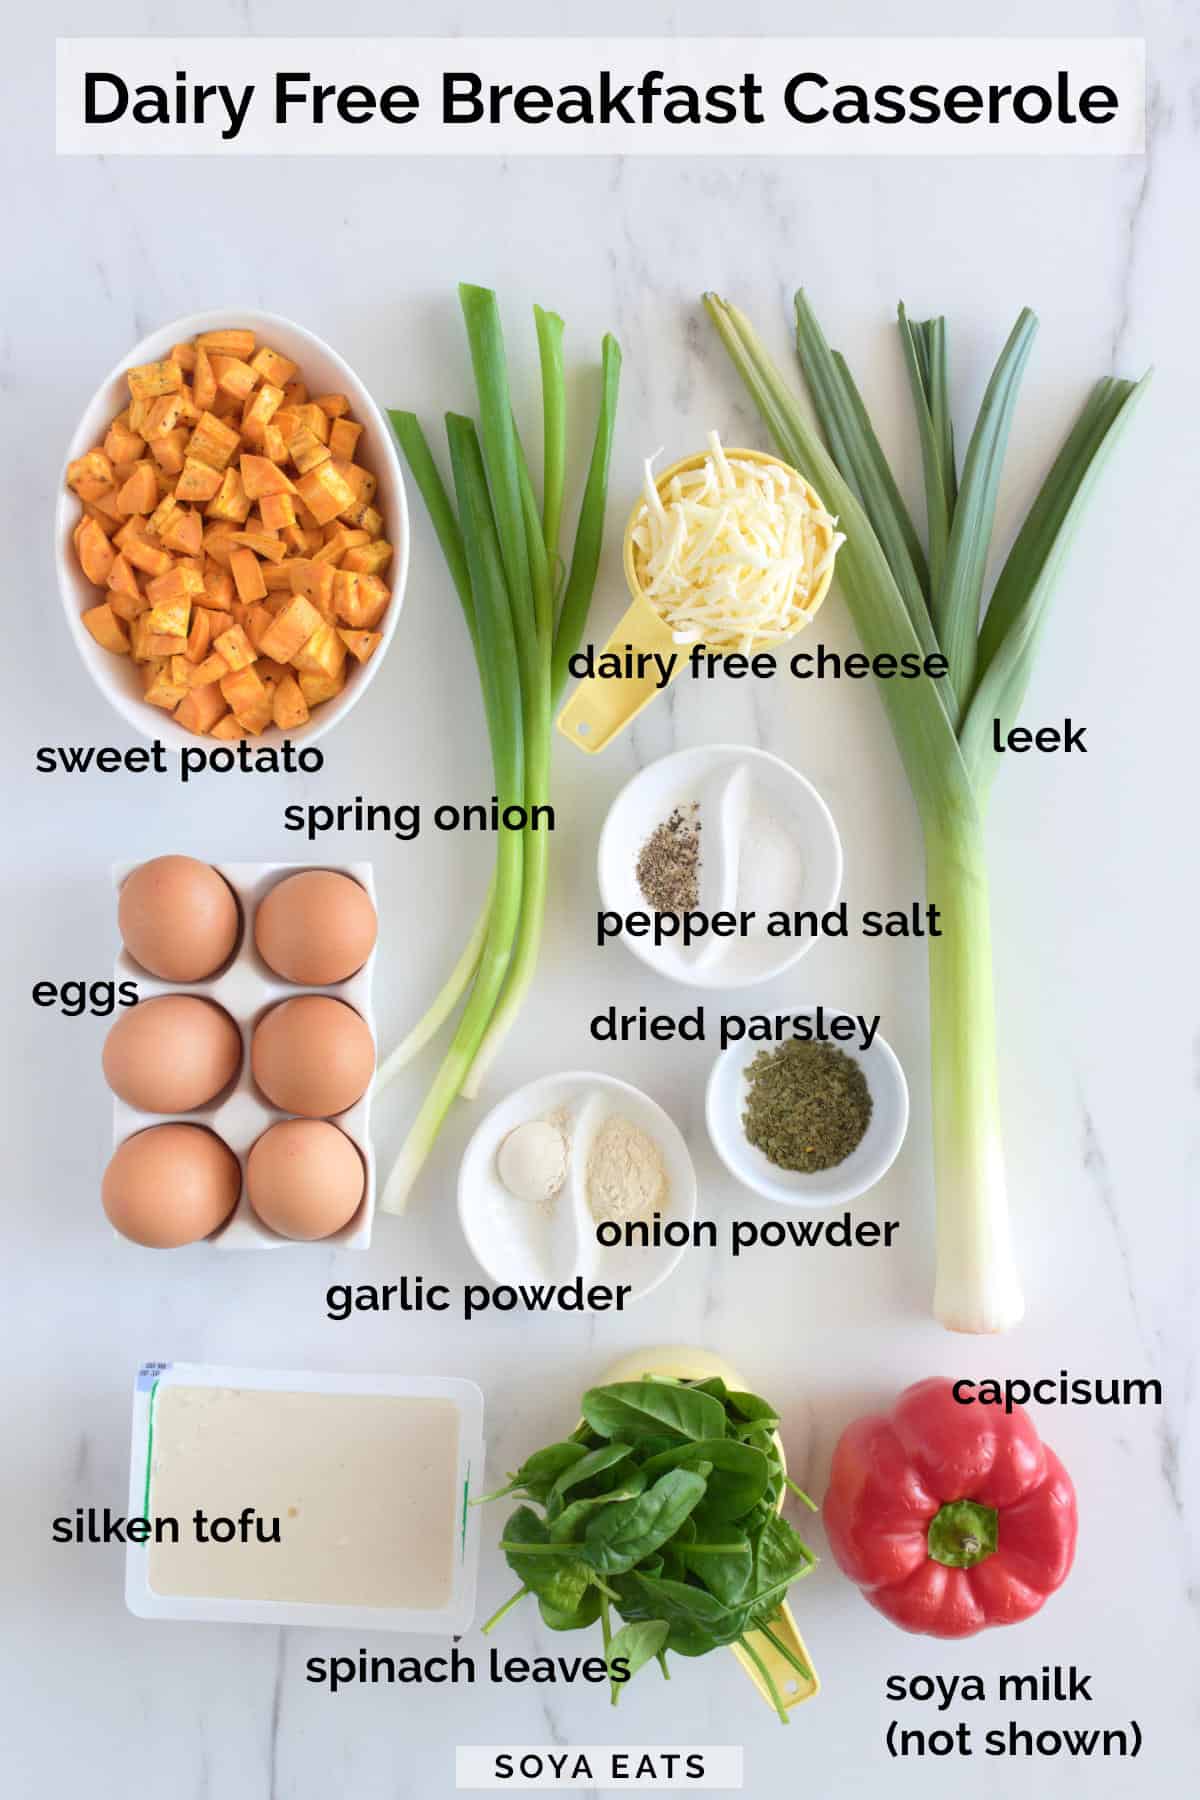 Ingredients image for a dairy free breakfast casserole.